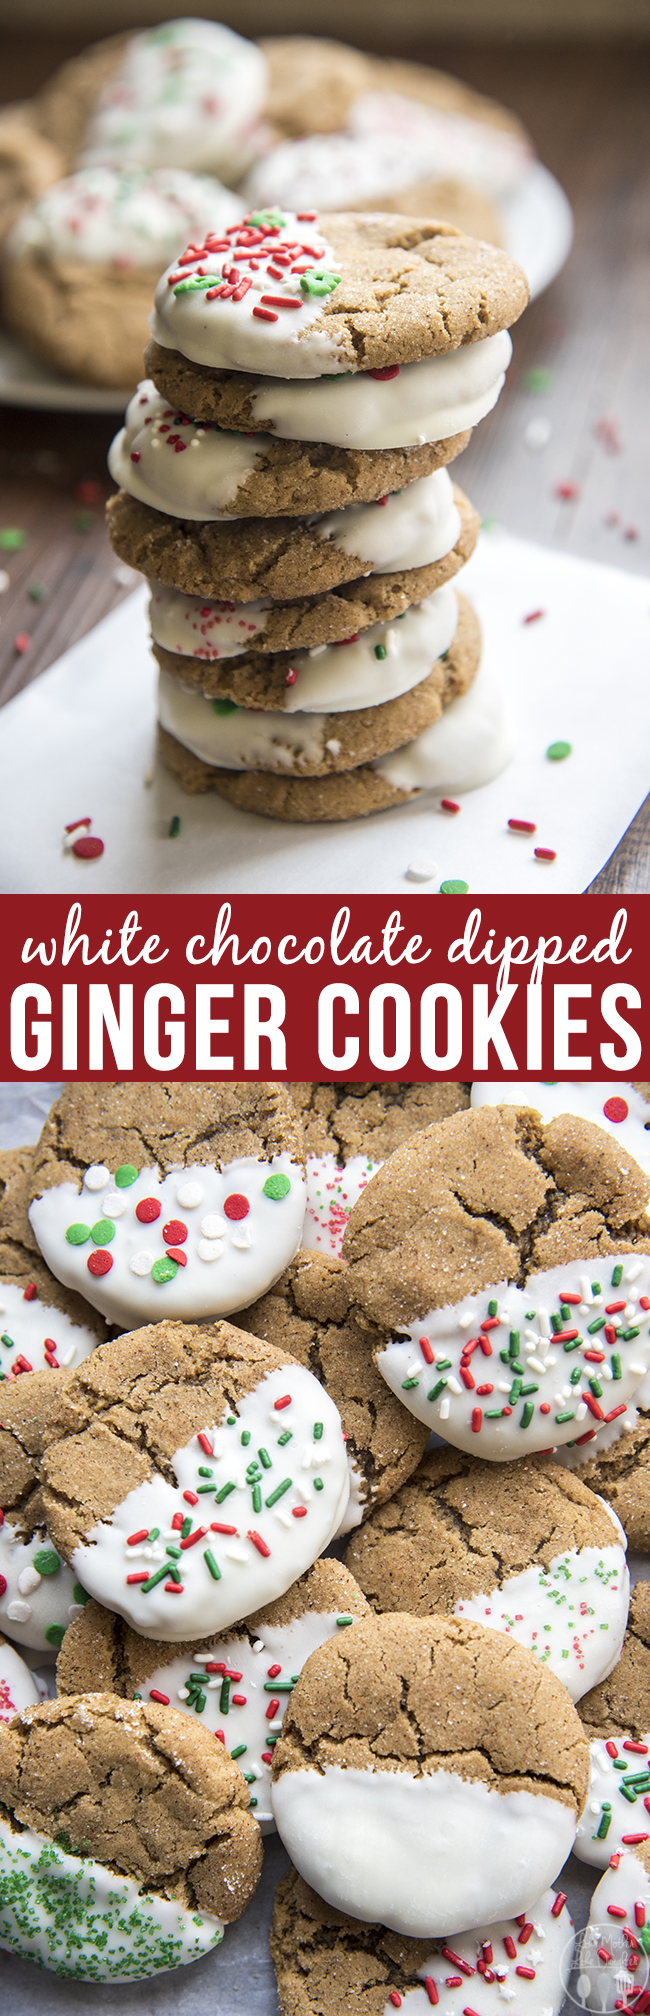 Title card for white chocolate dipped ginger cookies with text.